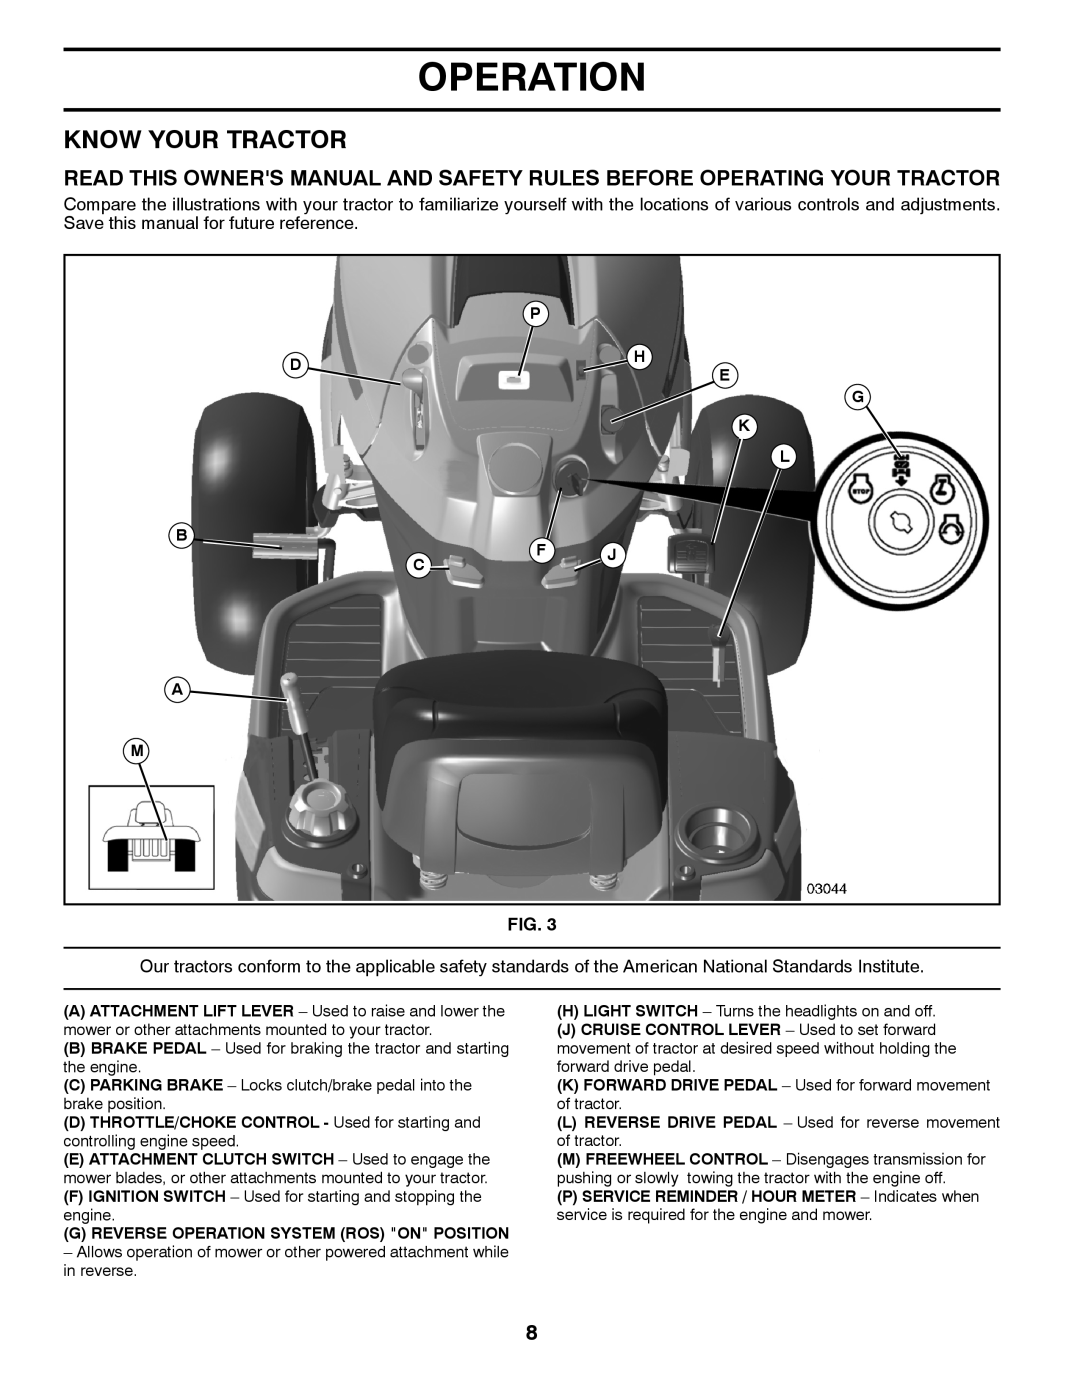 Husqvarna 96045002201 Know Your Tractor, P Dh E, B A M, G K L Cf J, G Reverse Operation System Ros On Position 